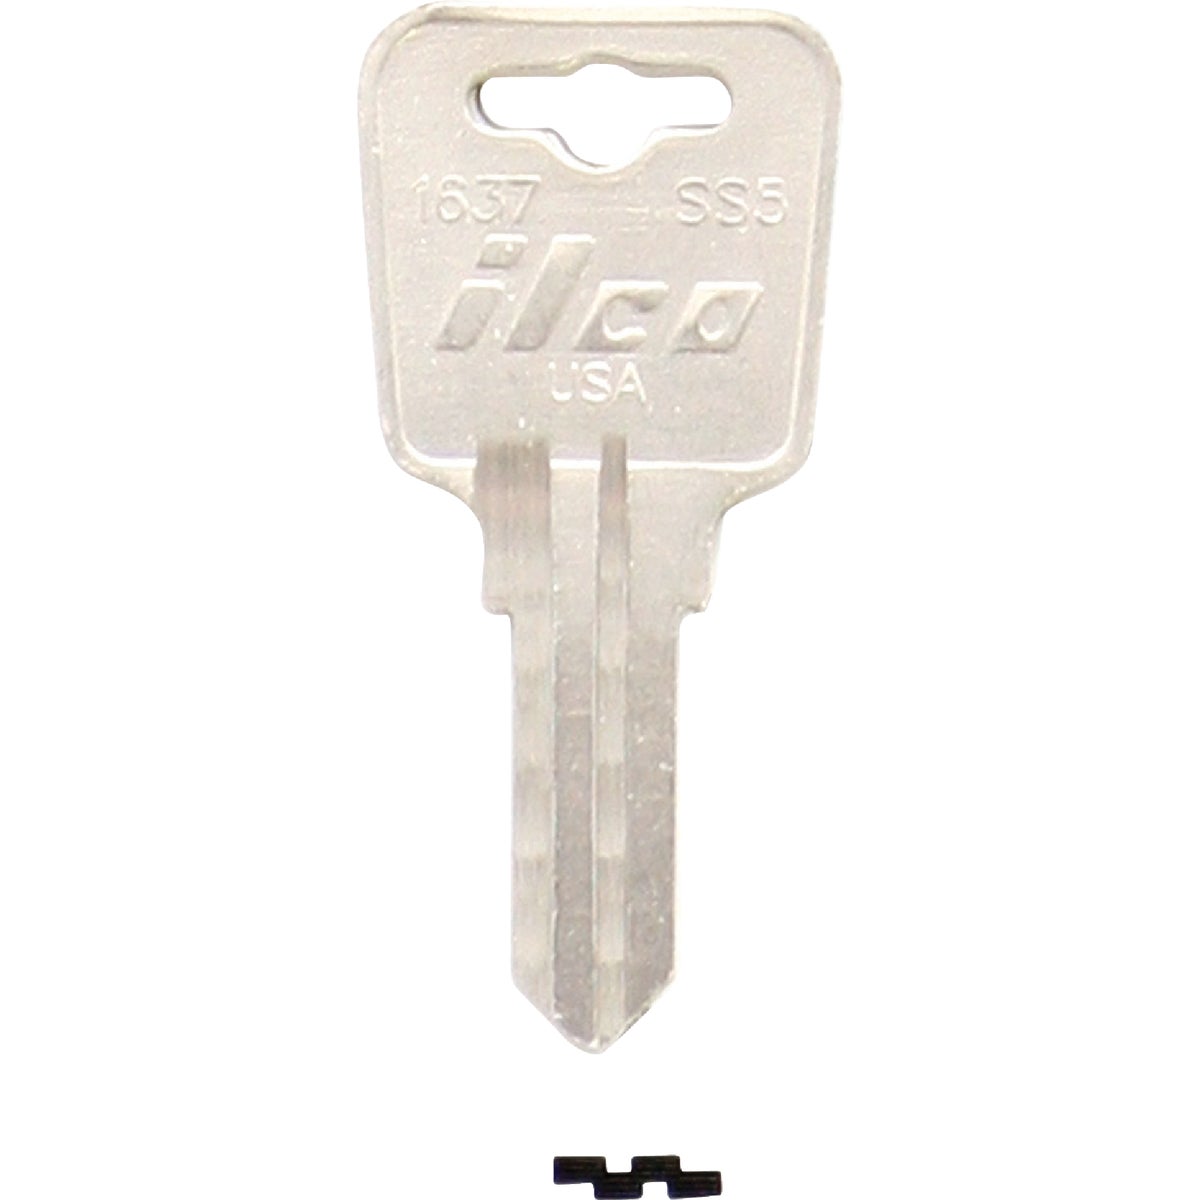 Sentry ILCO NULL ILCO Sentry Nickel Plated Safe Key SS5 / 1637 (10-Pack)